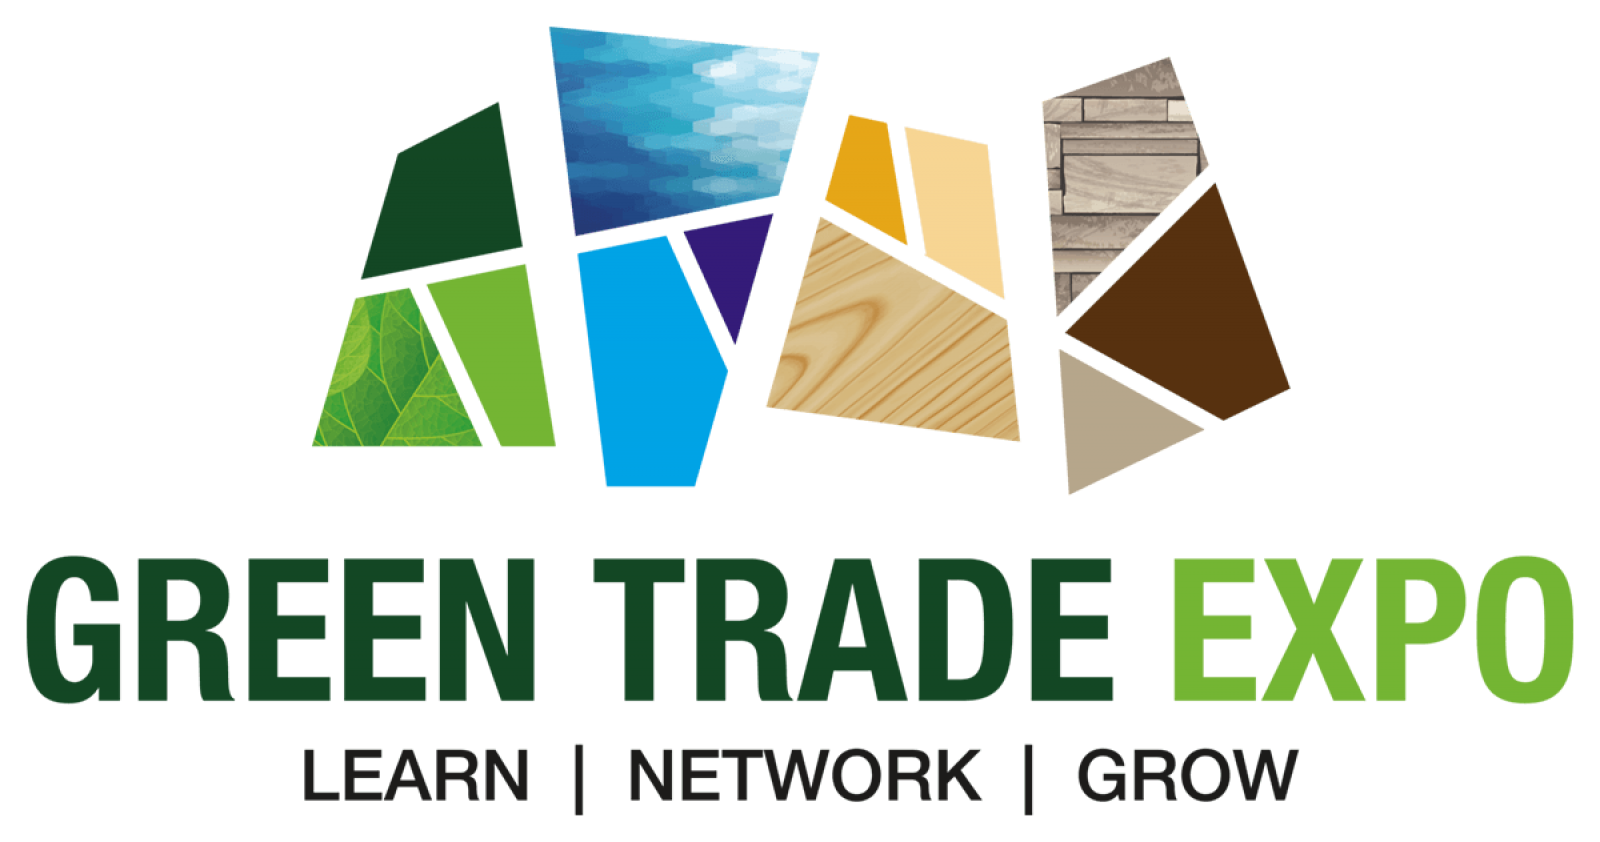 GreenTrade Expo expands to two days